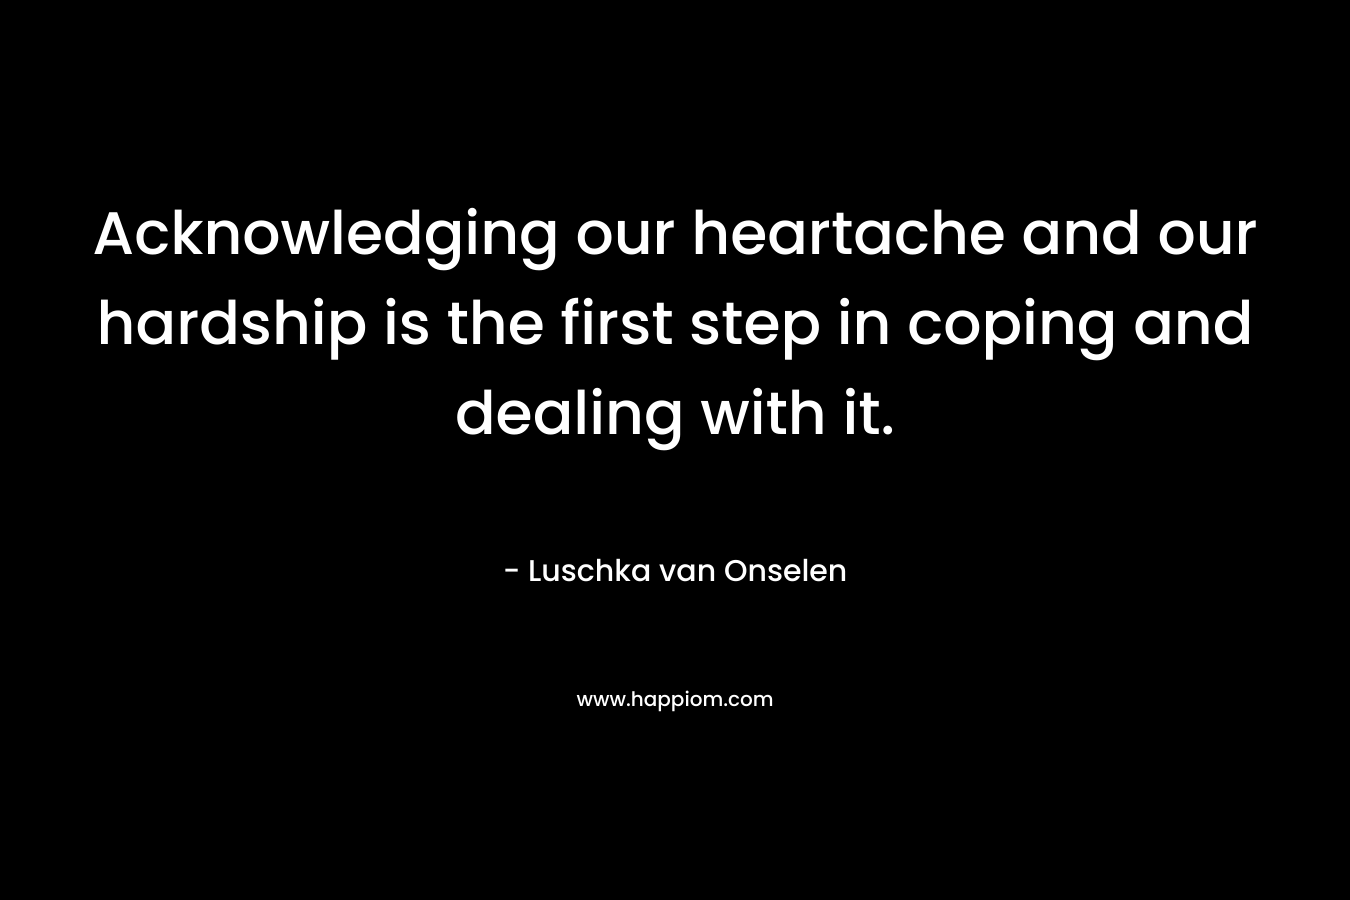 Acknowledging our heartache and our hardship is the first step in coping and dealing with it. – Luschka van Onselen